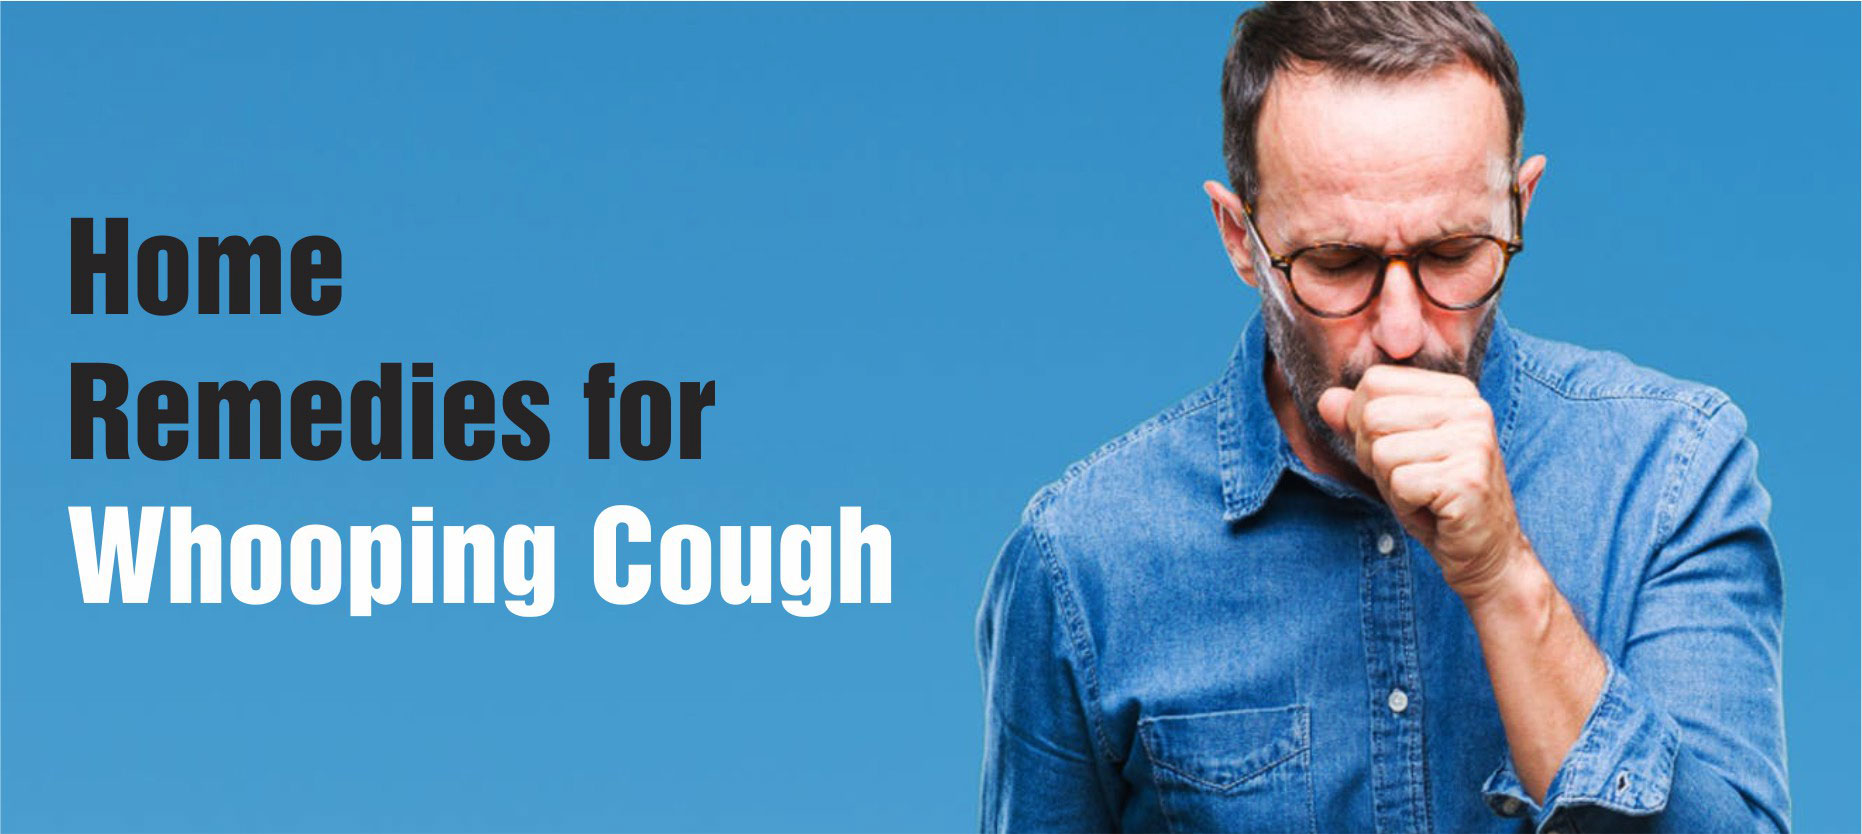 Home Remedies for Whooping Cough